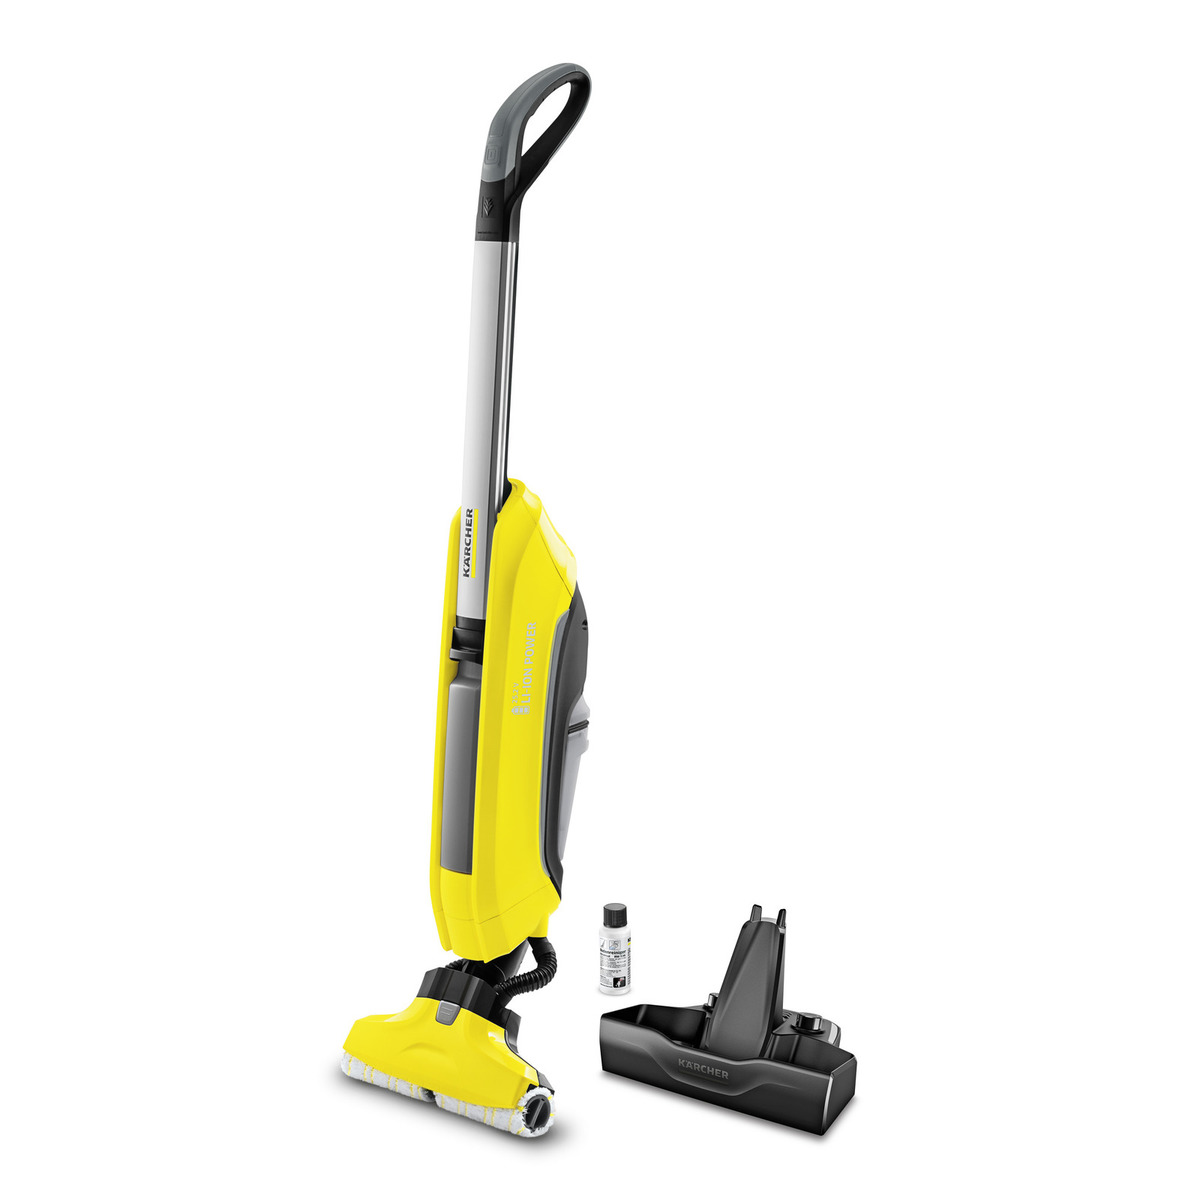 Электрошвабра Karcher fc 5 cordless электрошвабра karcher fc 5 cordless